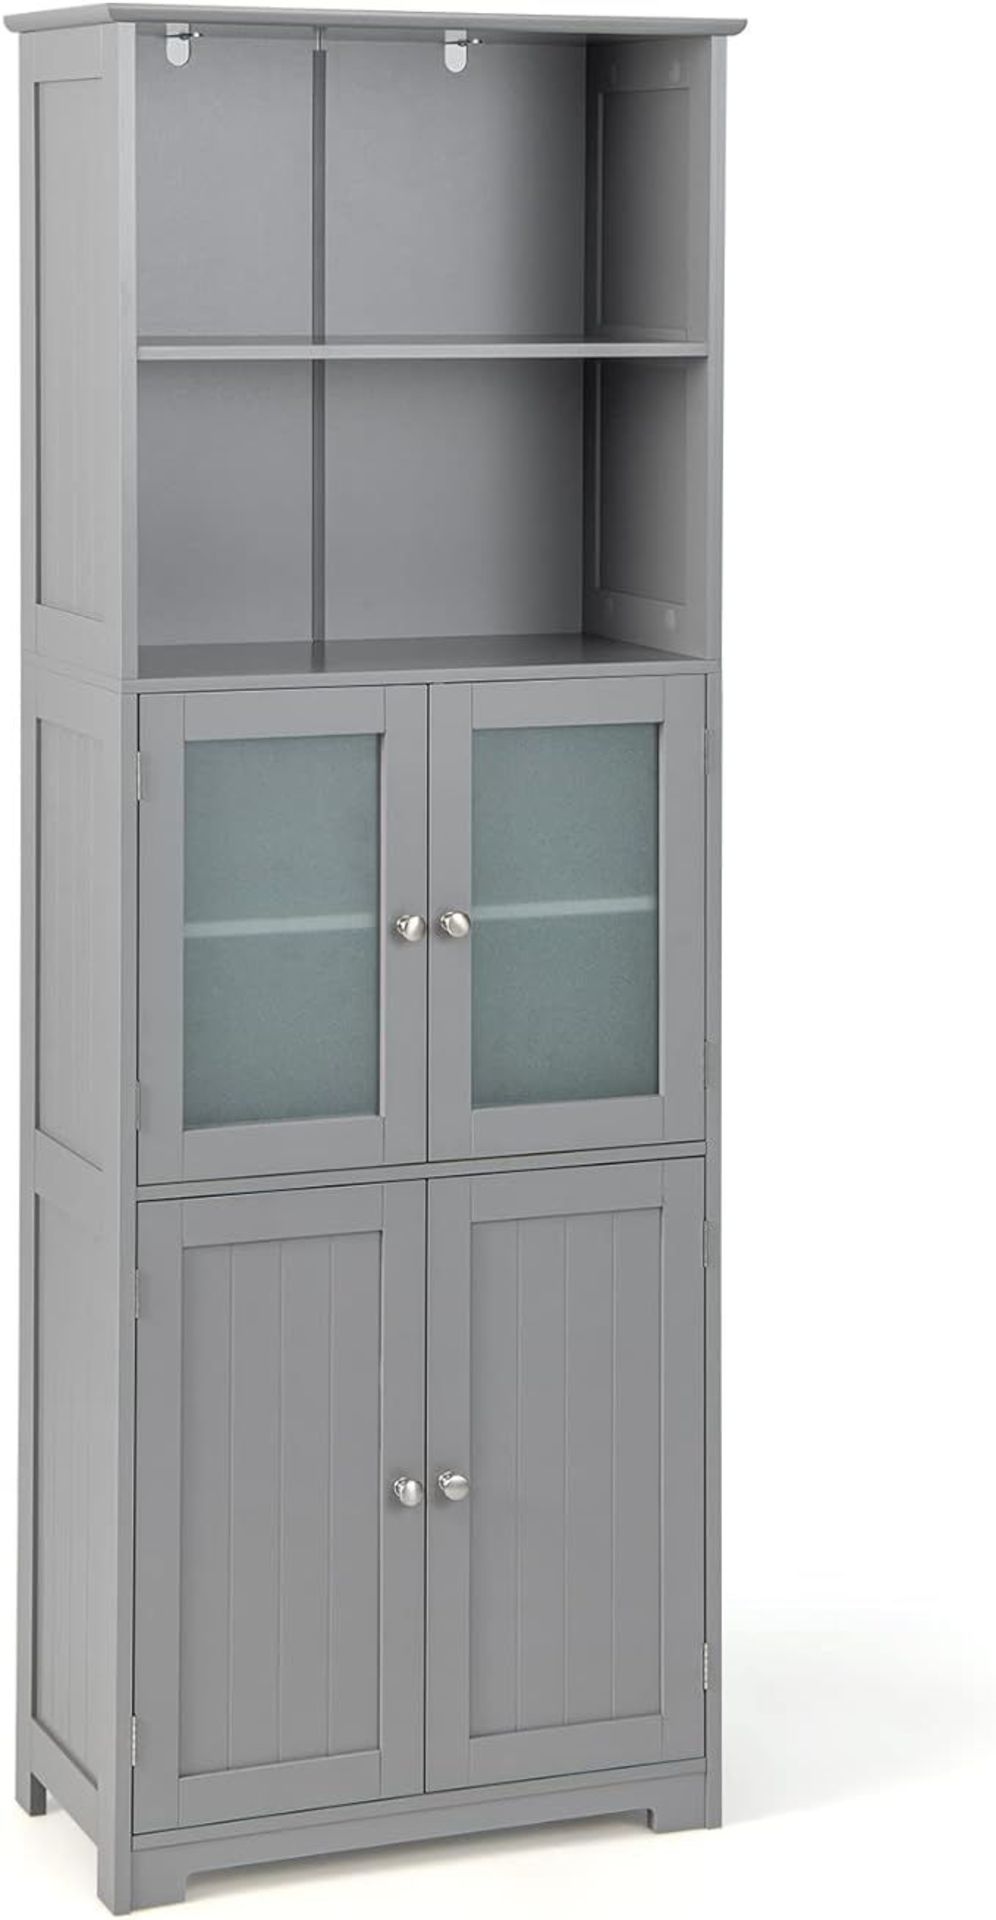 Luxury Bathroom Tall Cabinet, Freestanding Storage Cupboard with Tempered Glass Door and Open/